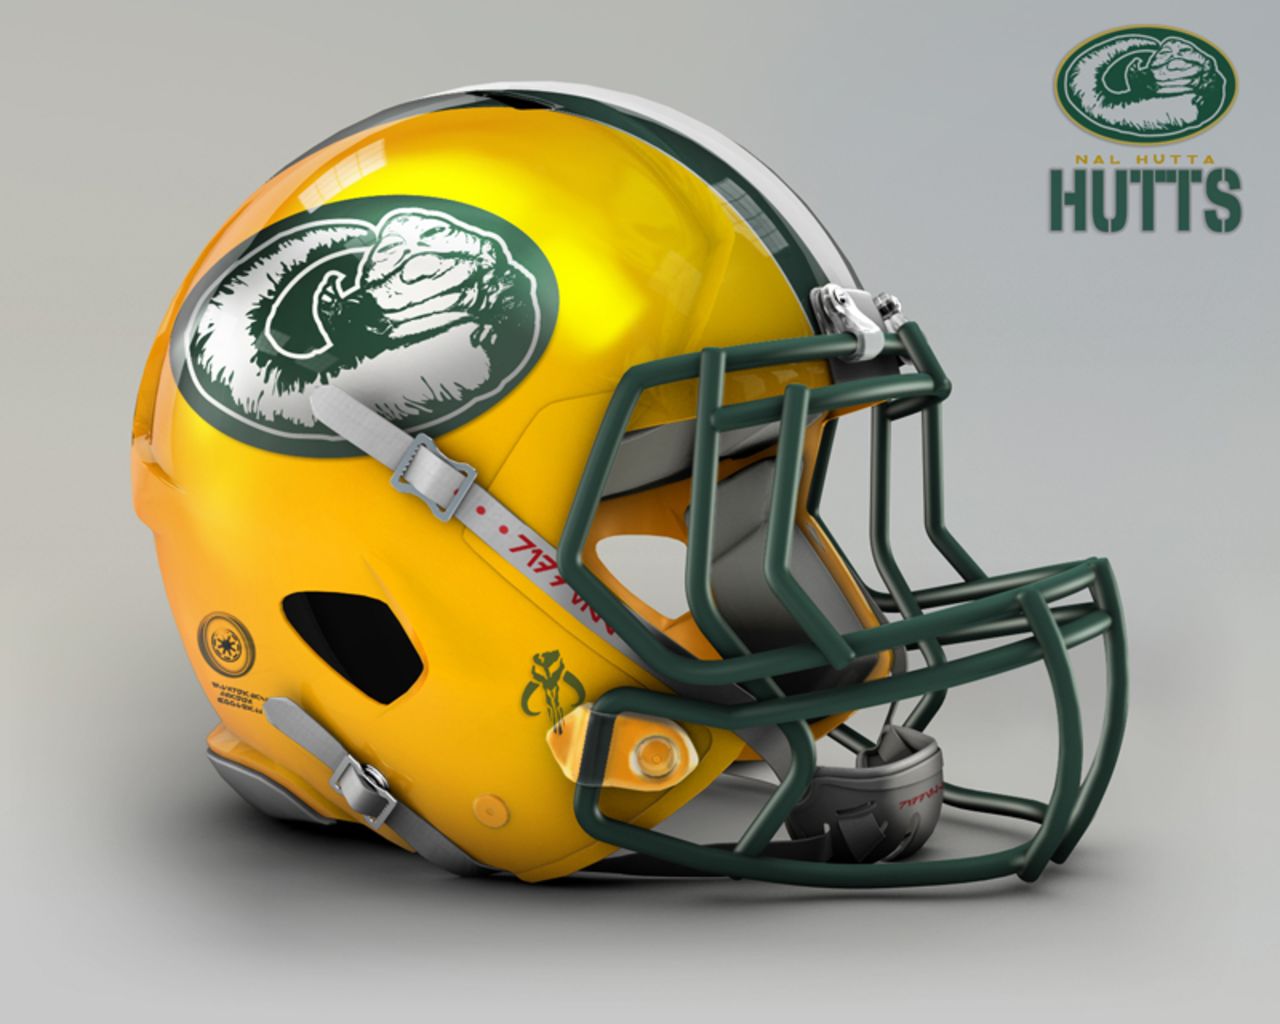 Easily shaped into a giant "G," the slimy piece of worm-ridden filth (Han Solo's words, not ours) known as Jabba the Hutt becomes quite the physical feature of the reimagined helmet for the <a href="http://www.packers.com/" target="_blank" target="_blank">Green Bay Packers.</a>